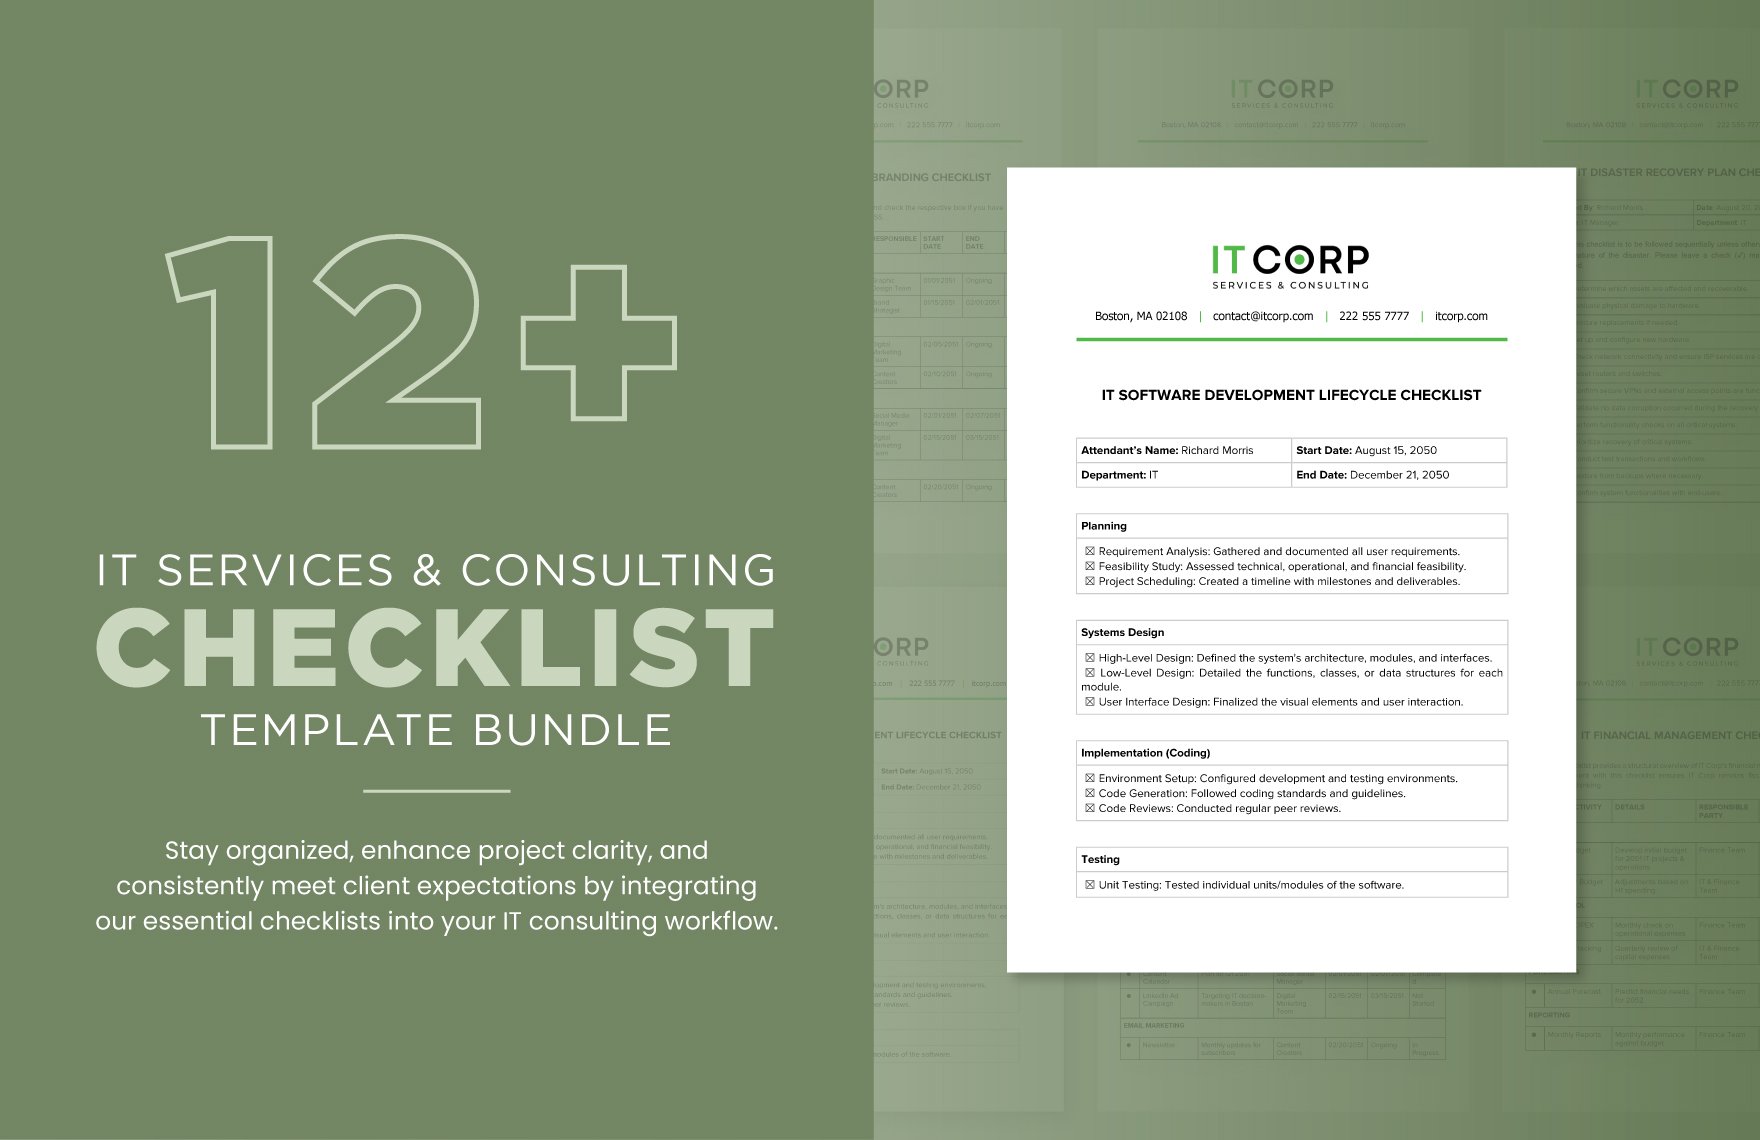 12+ IT Services and Consulting Checklist Template Bundle